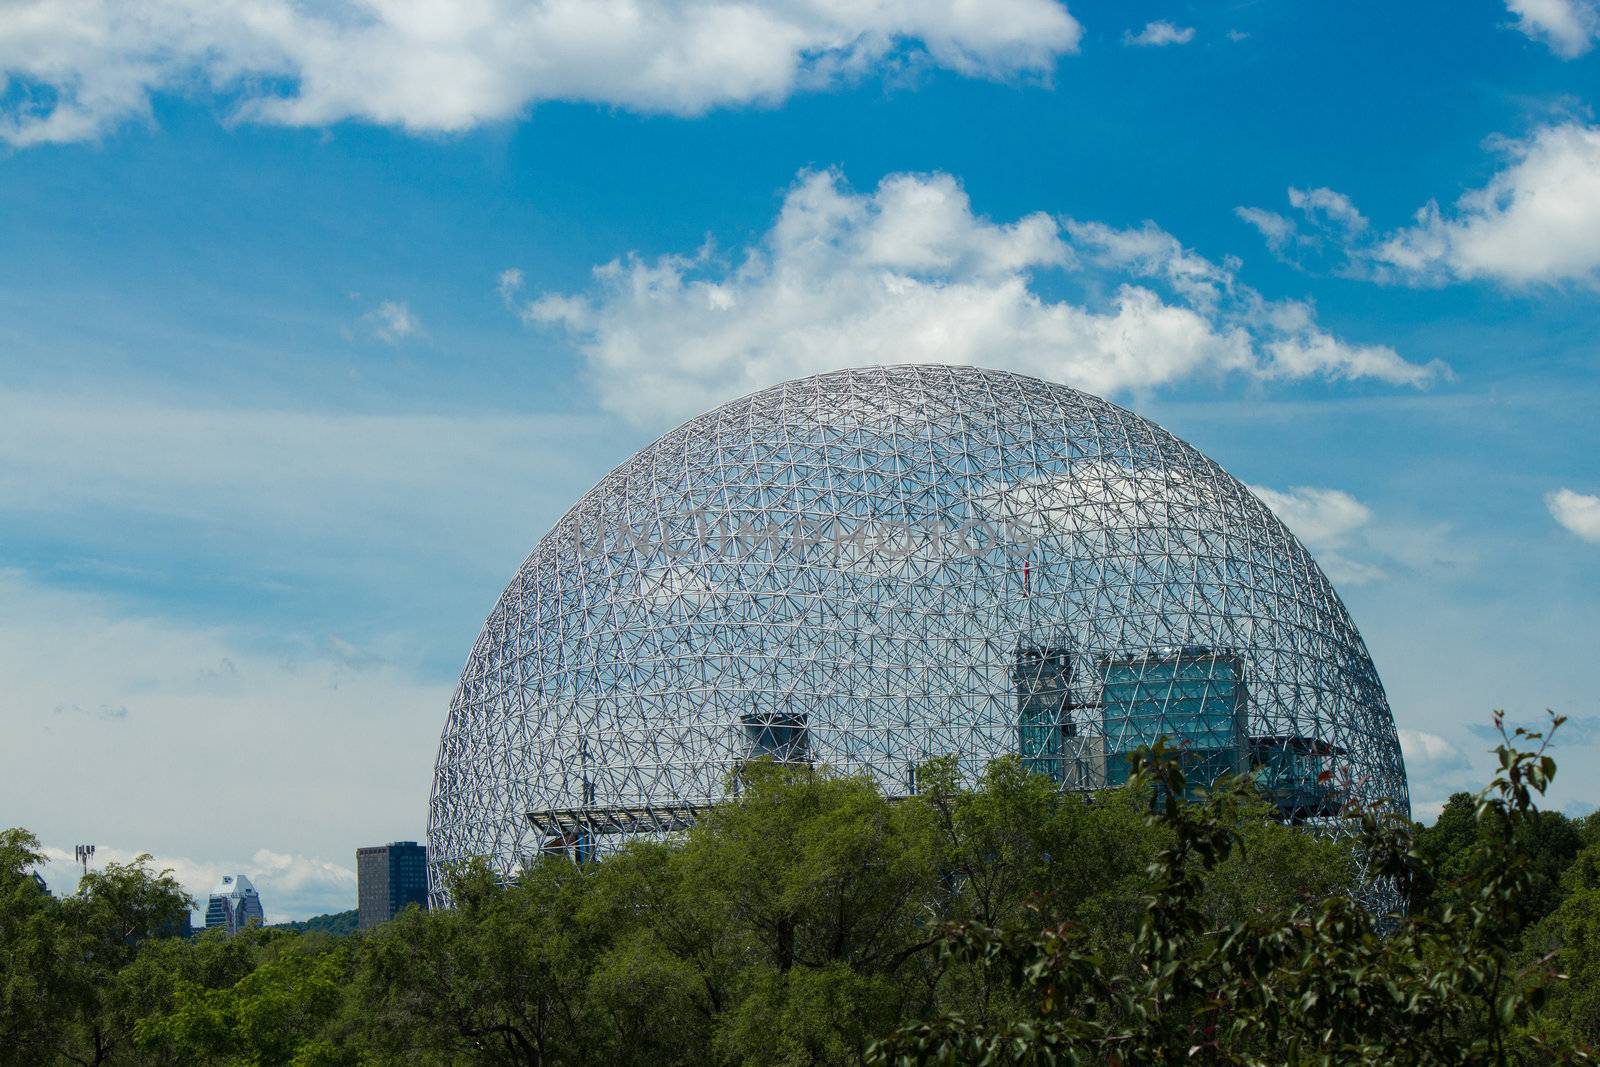 Biodome in Montreal, Canada by bigjohn36